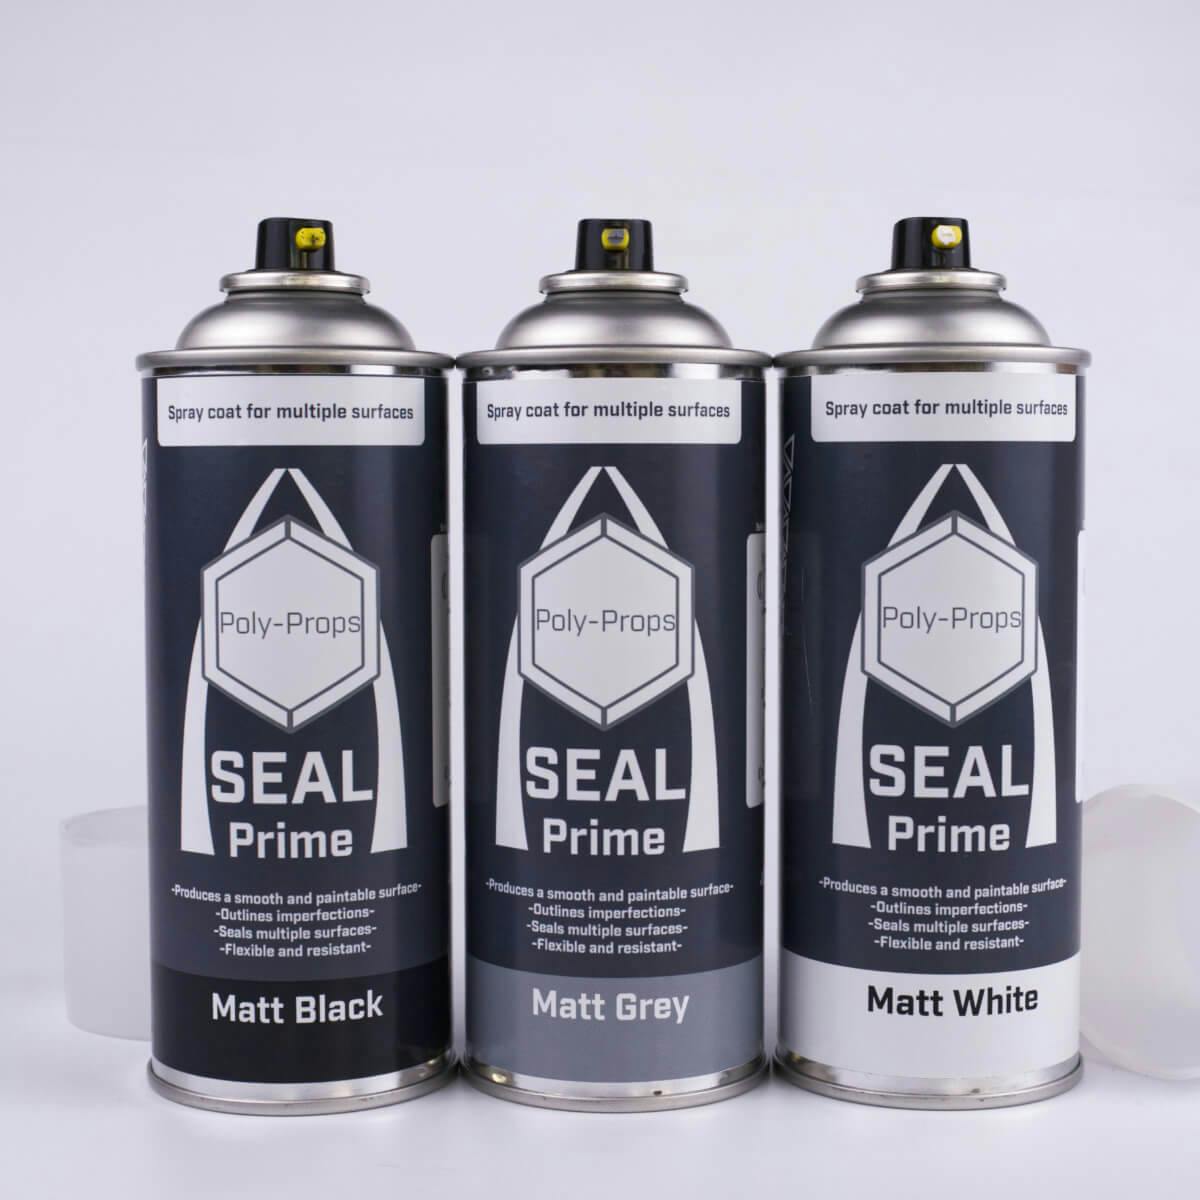 All colour variants of Seal Prime spray primer with caps off and nozzles on